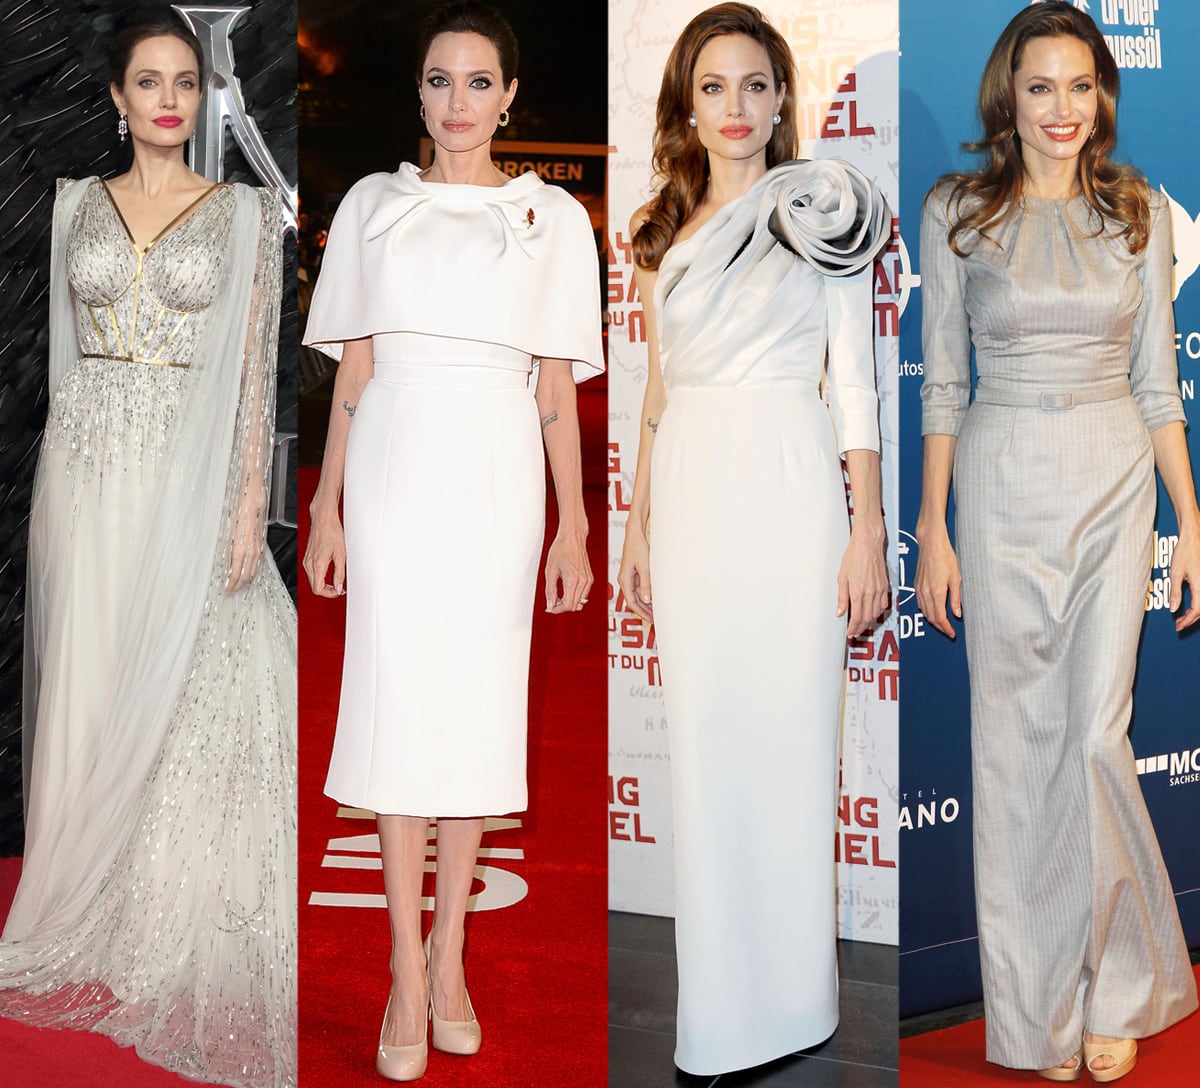 Angelina Jolie is just one of the many celebrity fans of Ralph & Russo